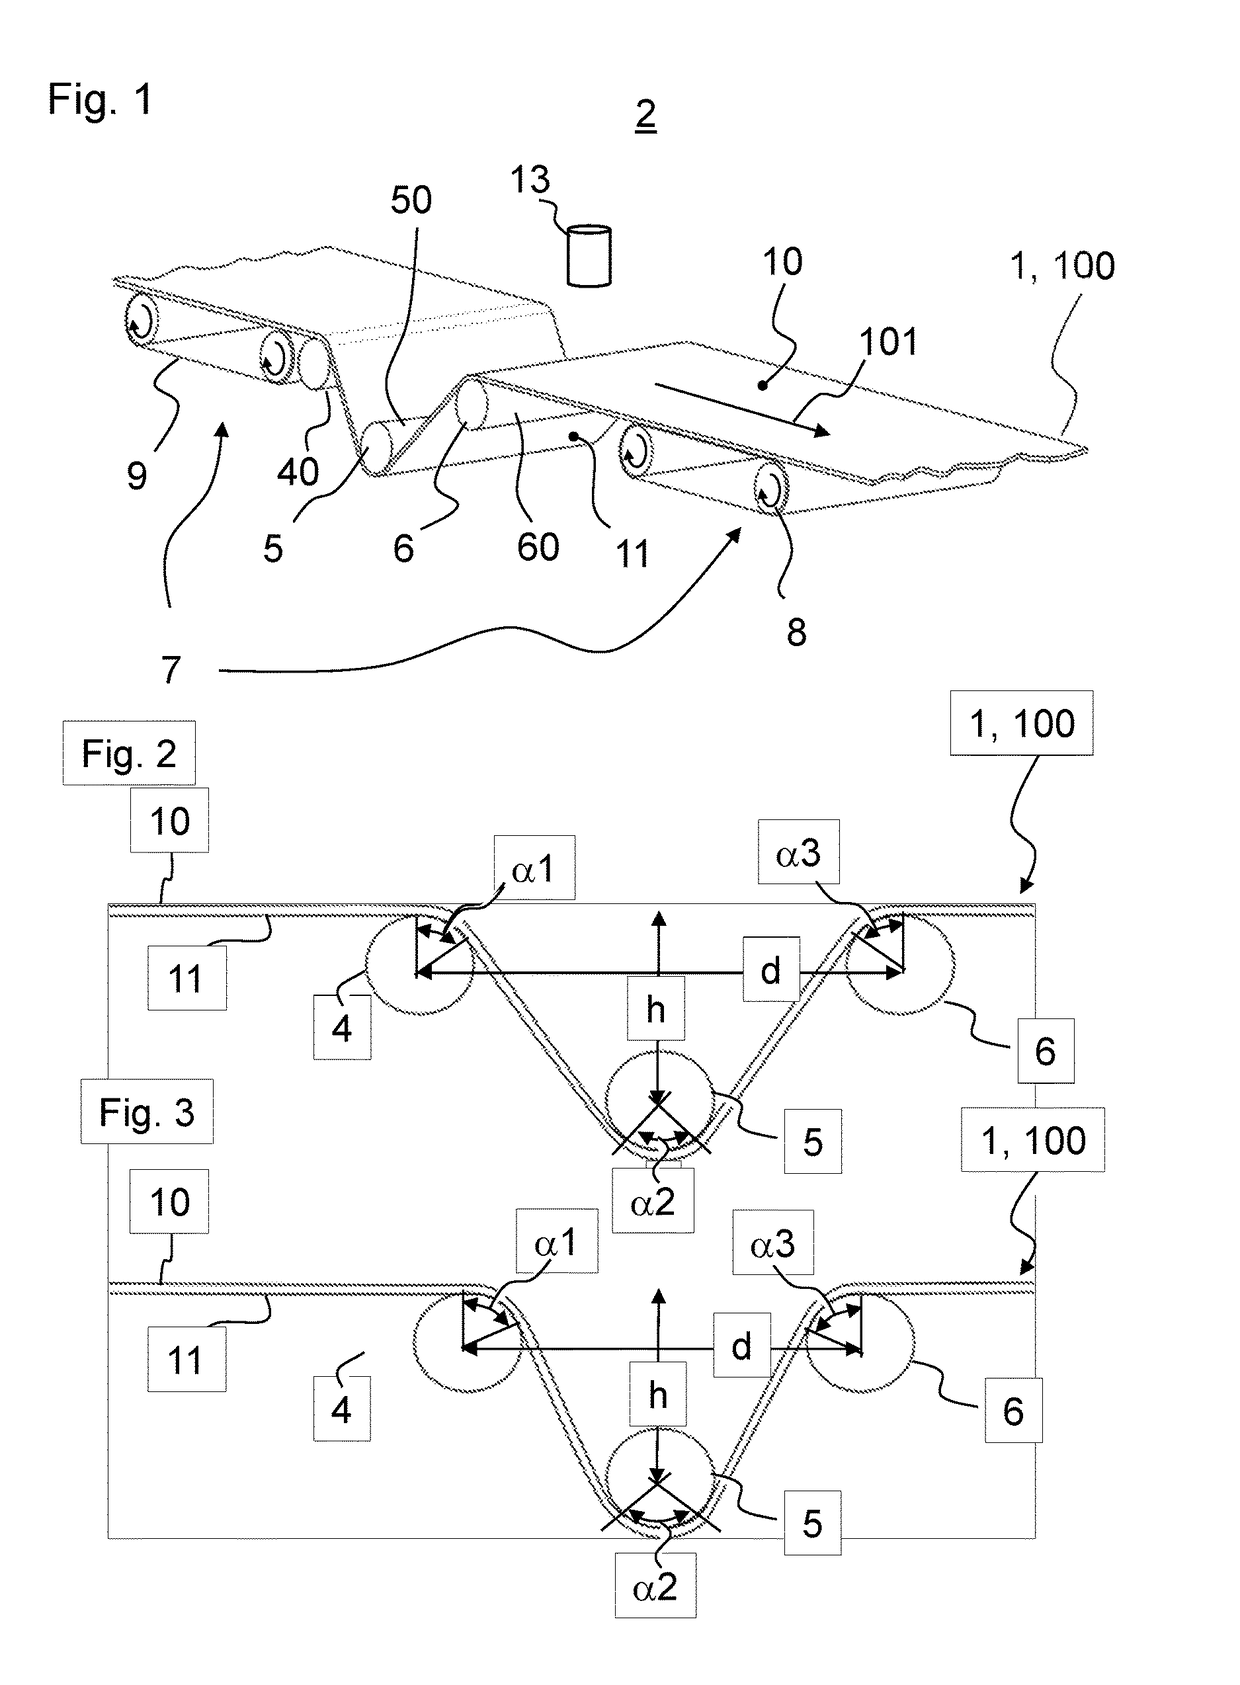 Apparatus and method for stabilizing sheets of a hard brittle material